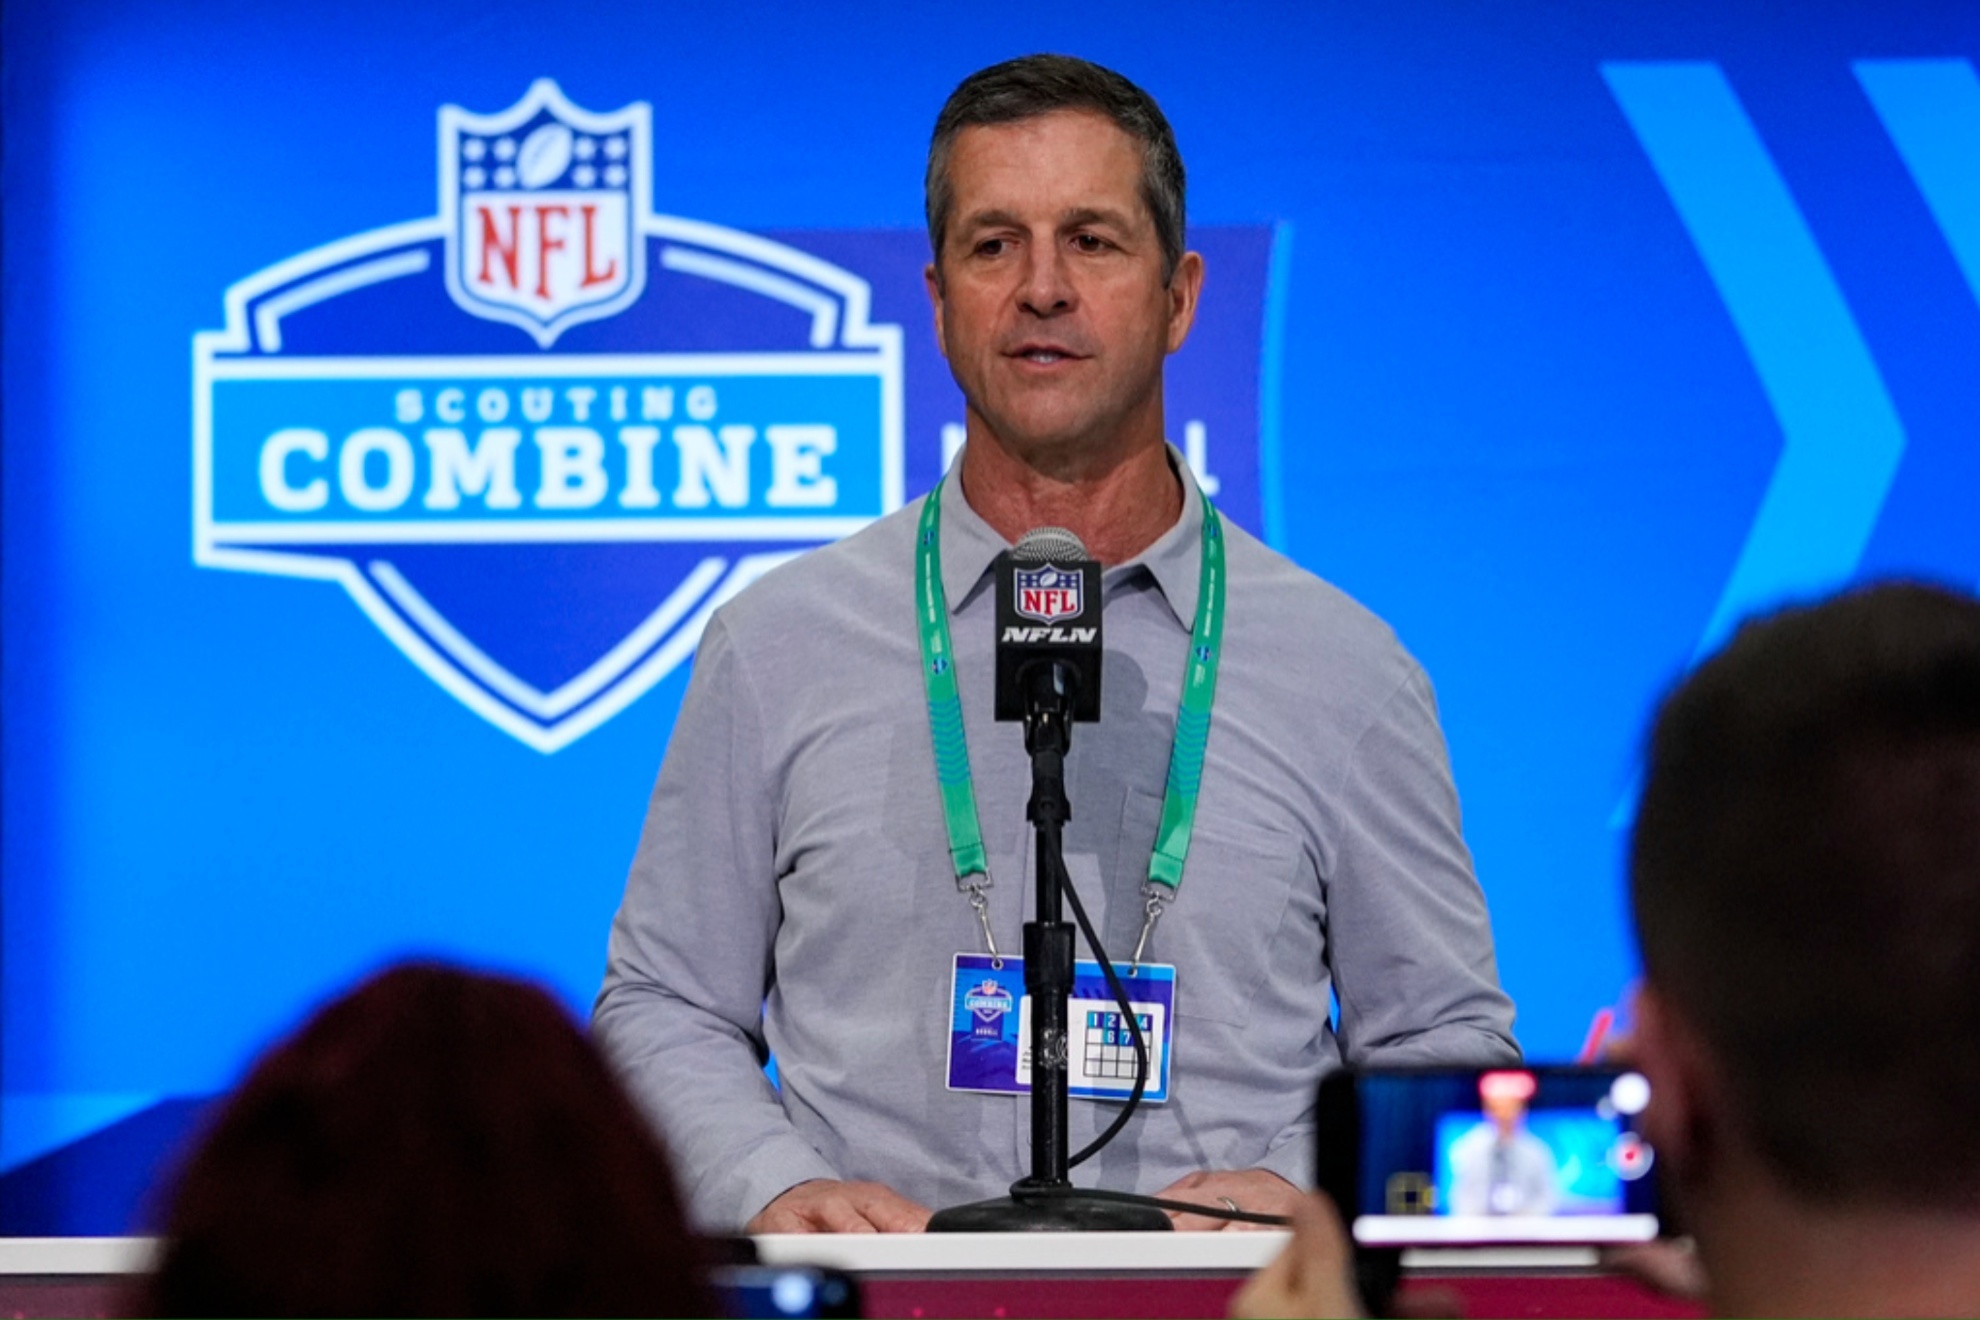 John Harbaugh speaks during a press conference at the NFL football scouting combine.